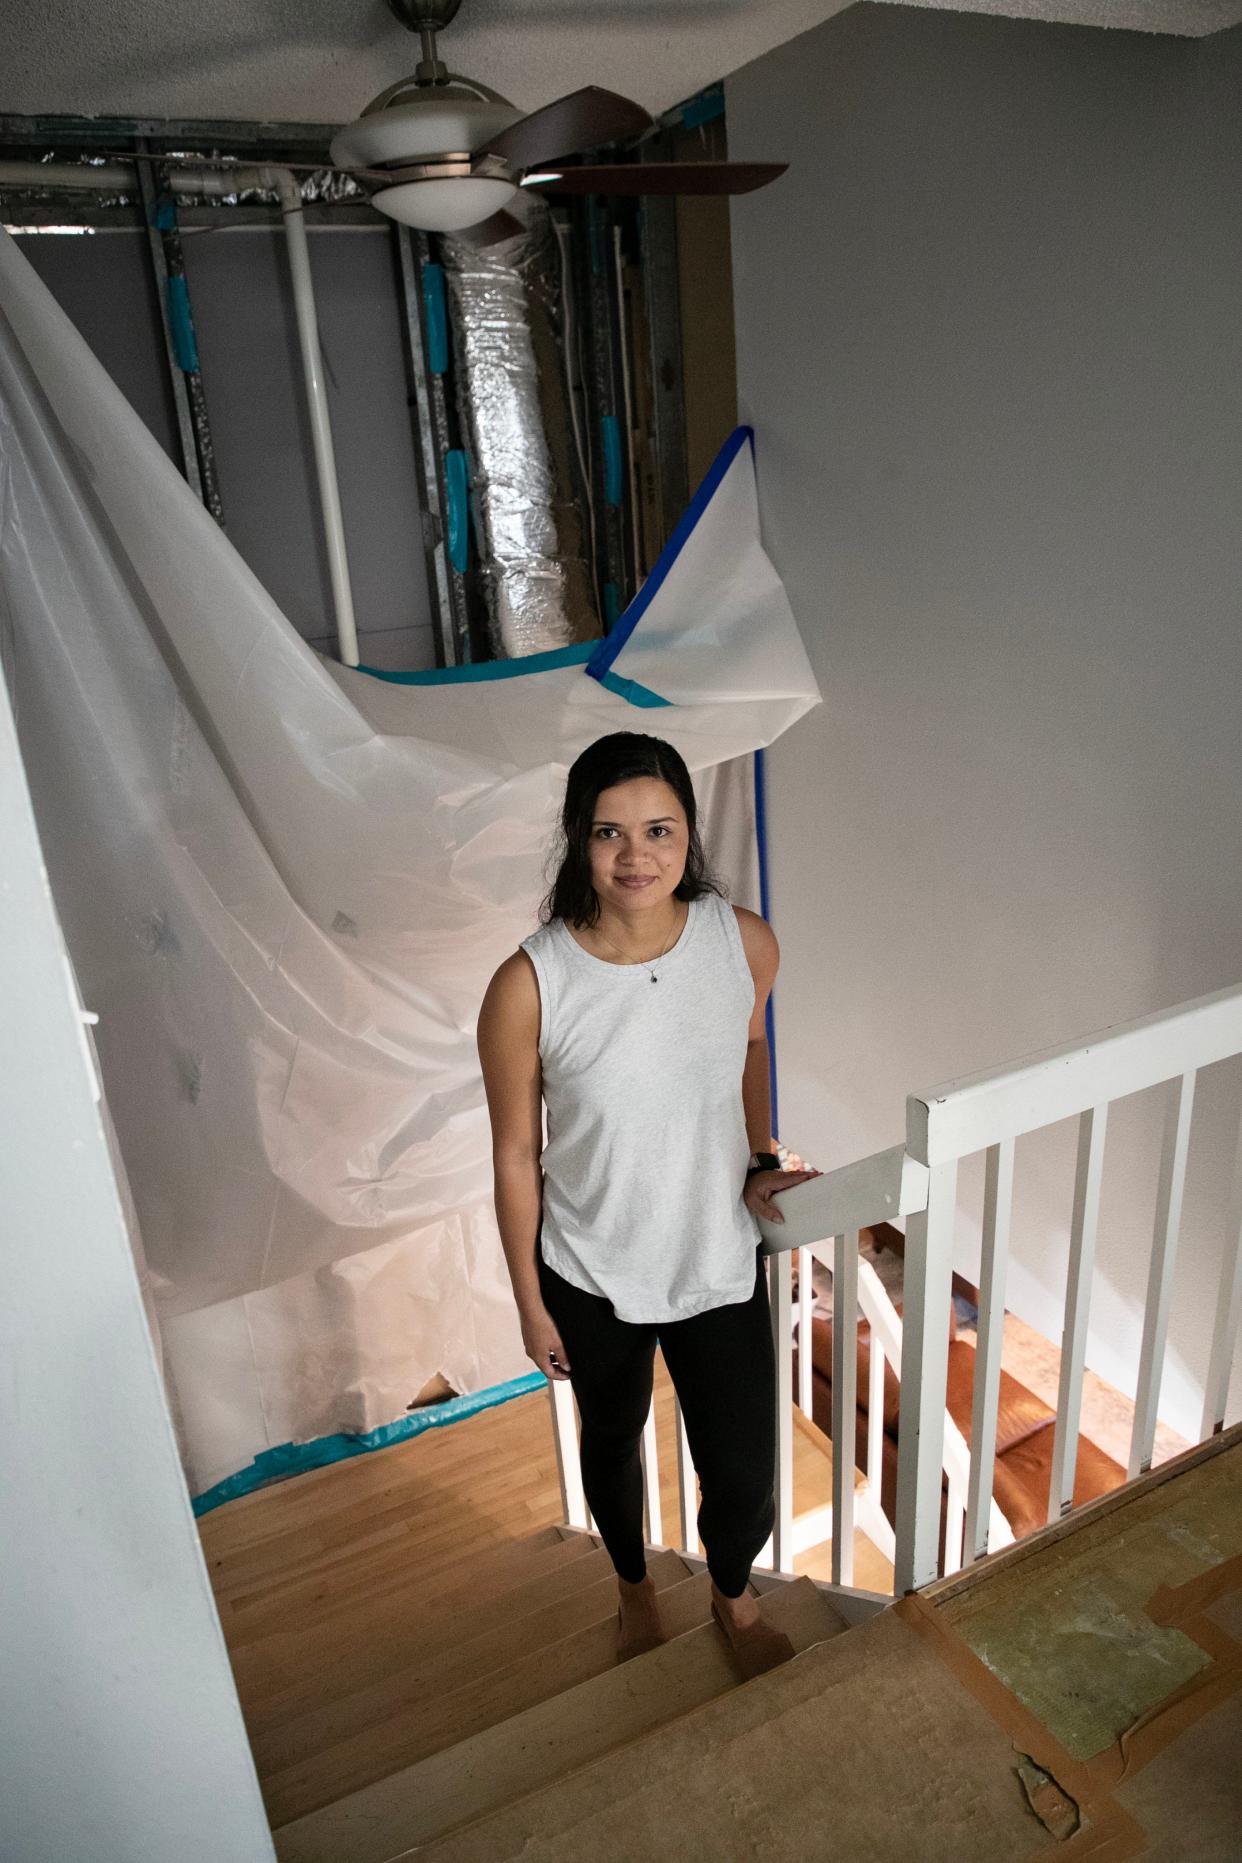 Sara Alvarez and her husband have been living with plastic and brown paper covering most of their walls since Hurricane Ian. Some of their drywall had to be removed after the roof was damaged, and they haven't been able to make repairs since the roof is still not fixed.